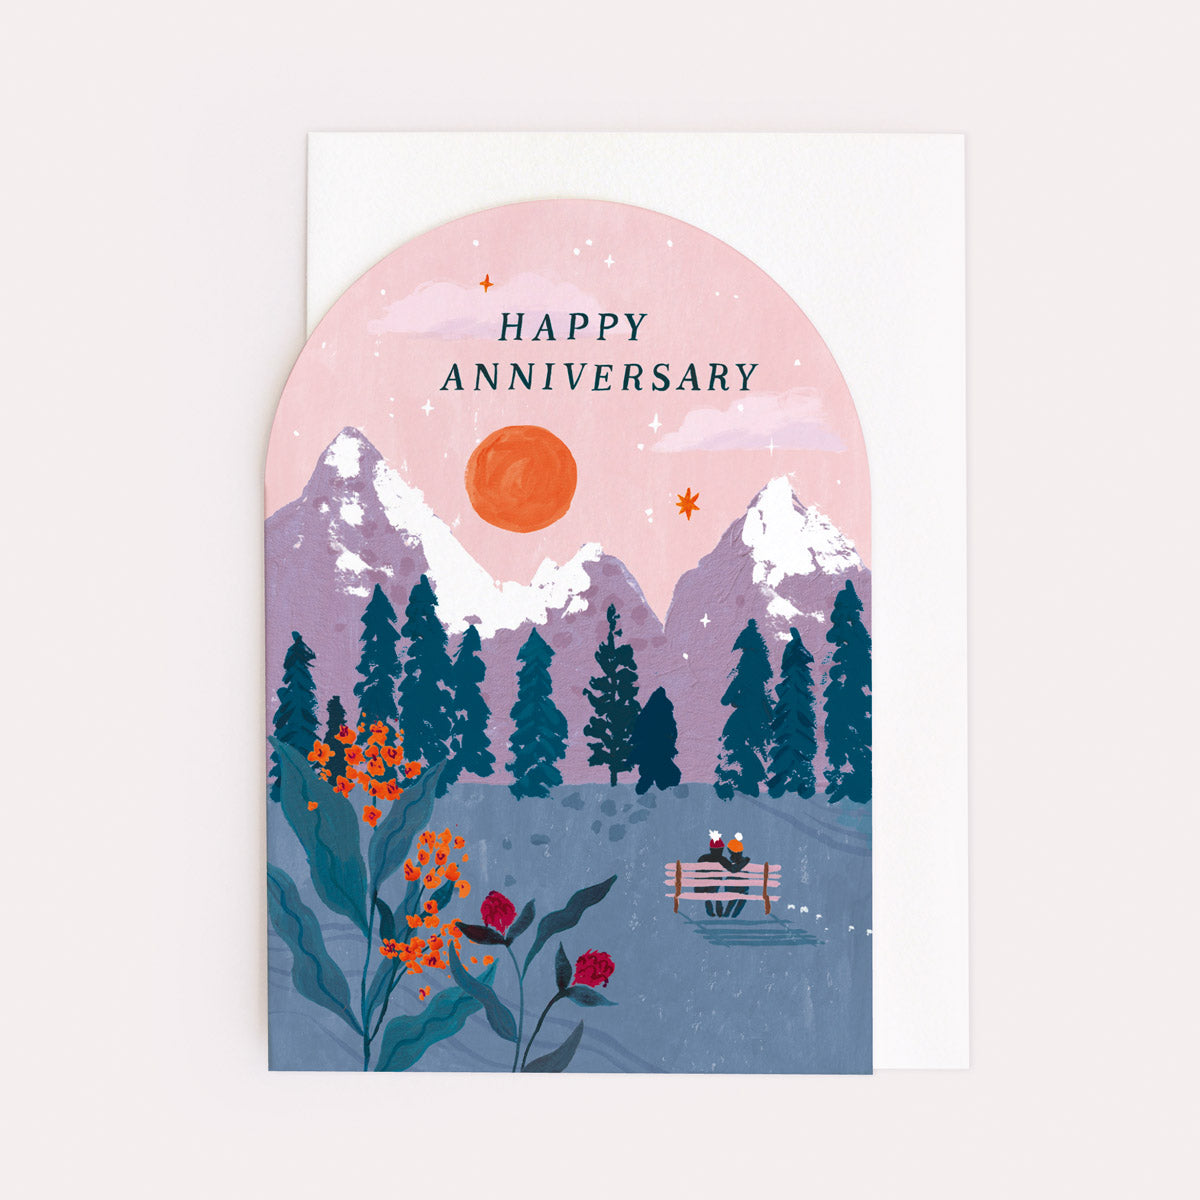 It turns out another year has passed. Thank you Anniversary Sunset Card